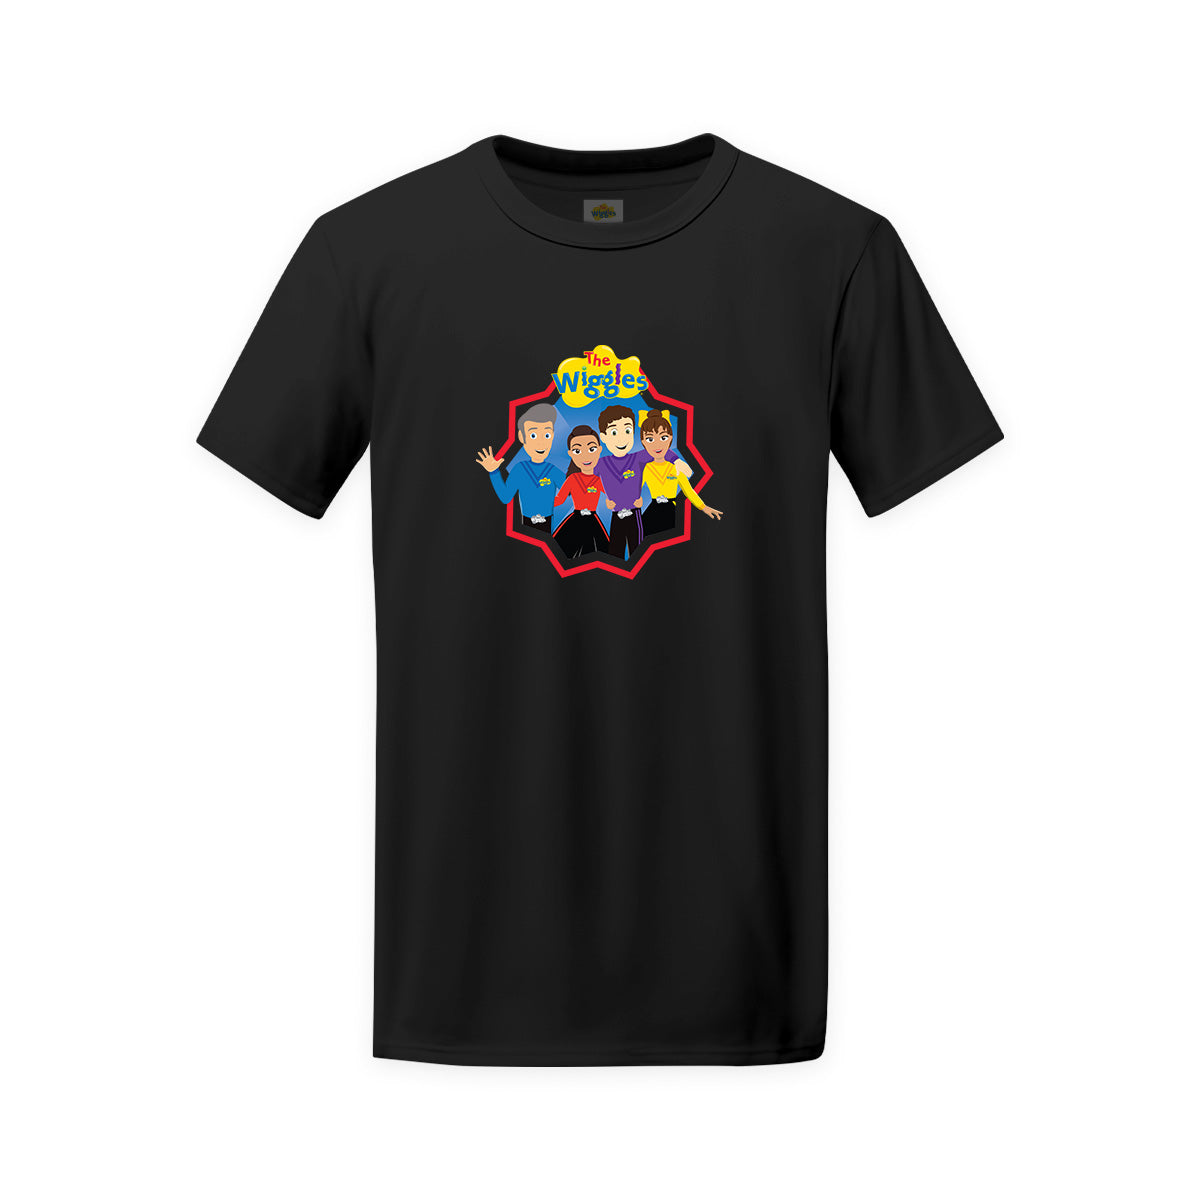 The Wiggles Adult Group Short Sleeve T-Shirt V2